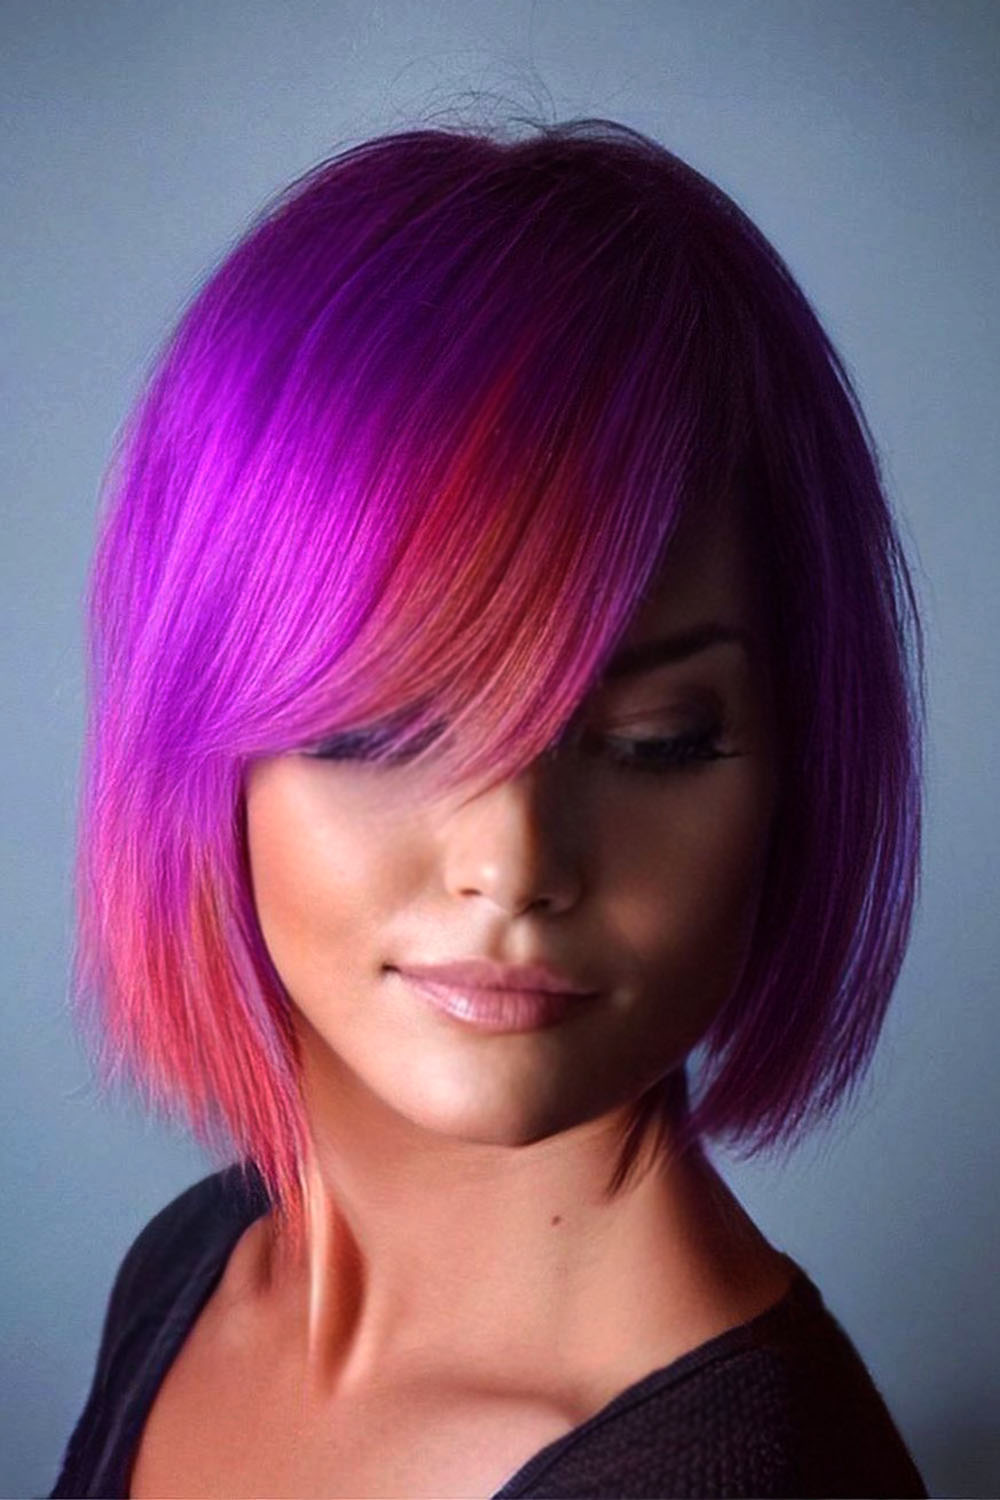 Hair with Pink and Red Highlights